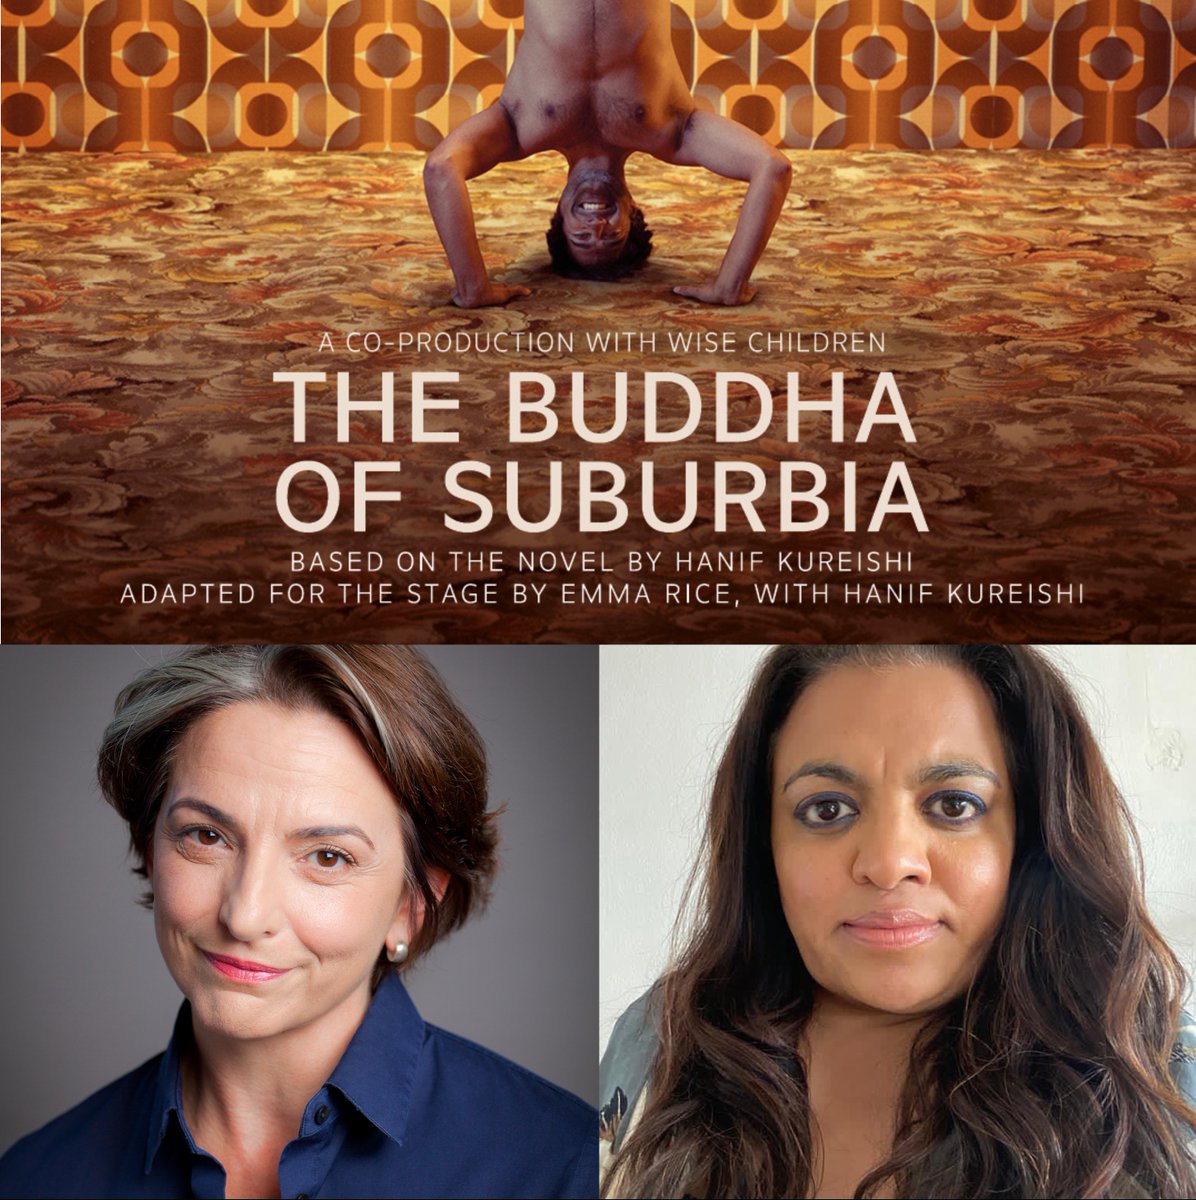 It's the first day of rehearsals for #TheBuddhaOfSuburbia, directed by #EmmaRice in a co-production for @TheRSC and @Wise_Children. Wishing choreographer @EttaMurfitt and @rinafatania (Tracey & Others) a wonderful day!